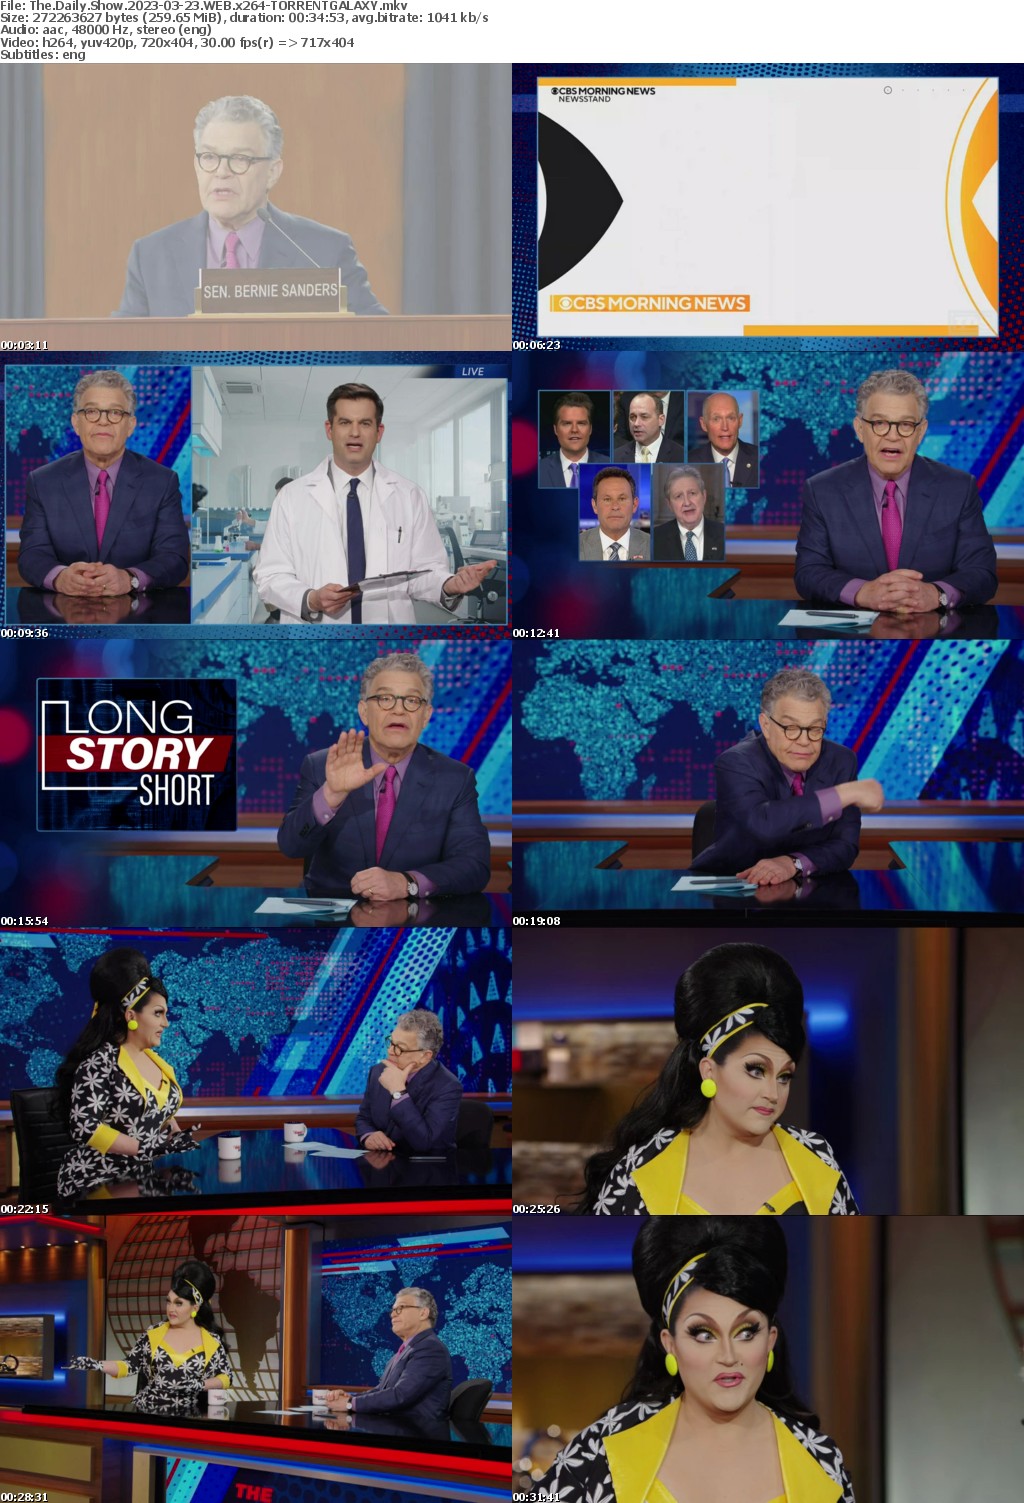 The Daily Show 2023-03-23 WEB x264-GALAXY